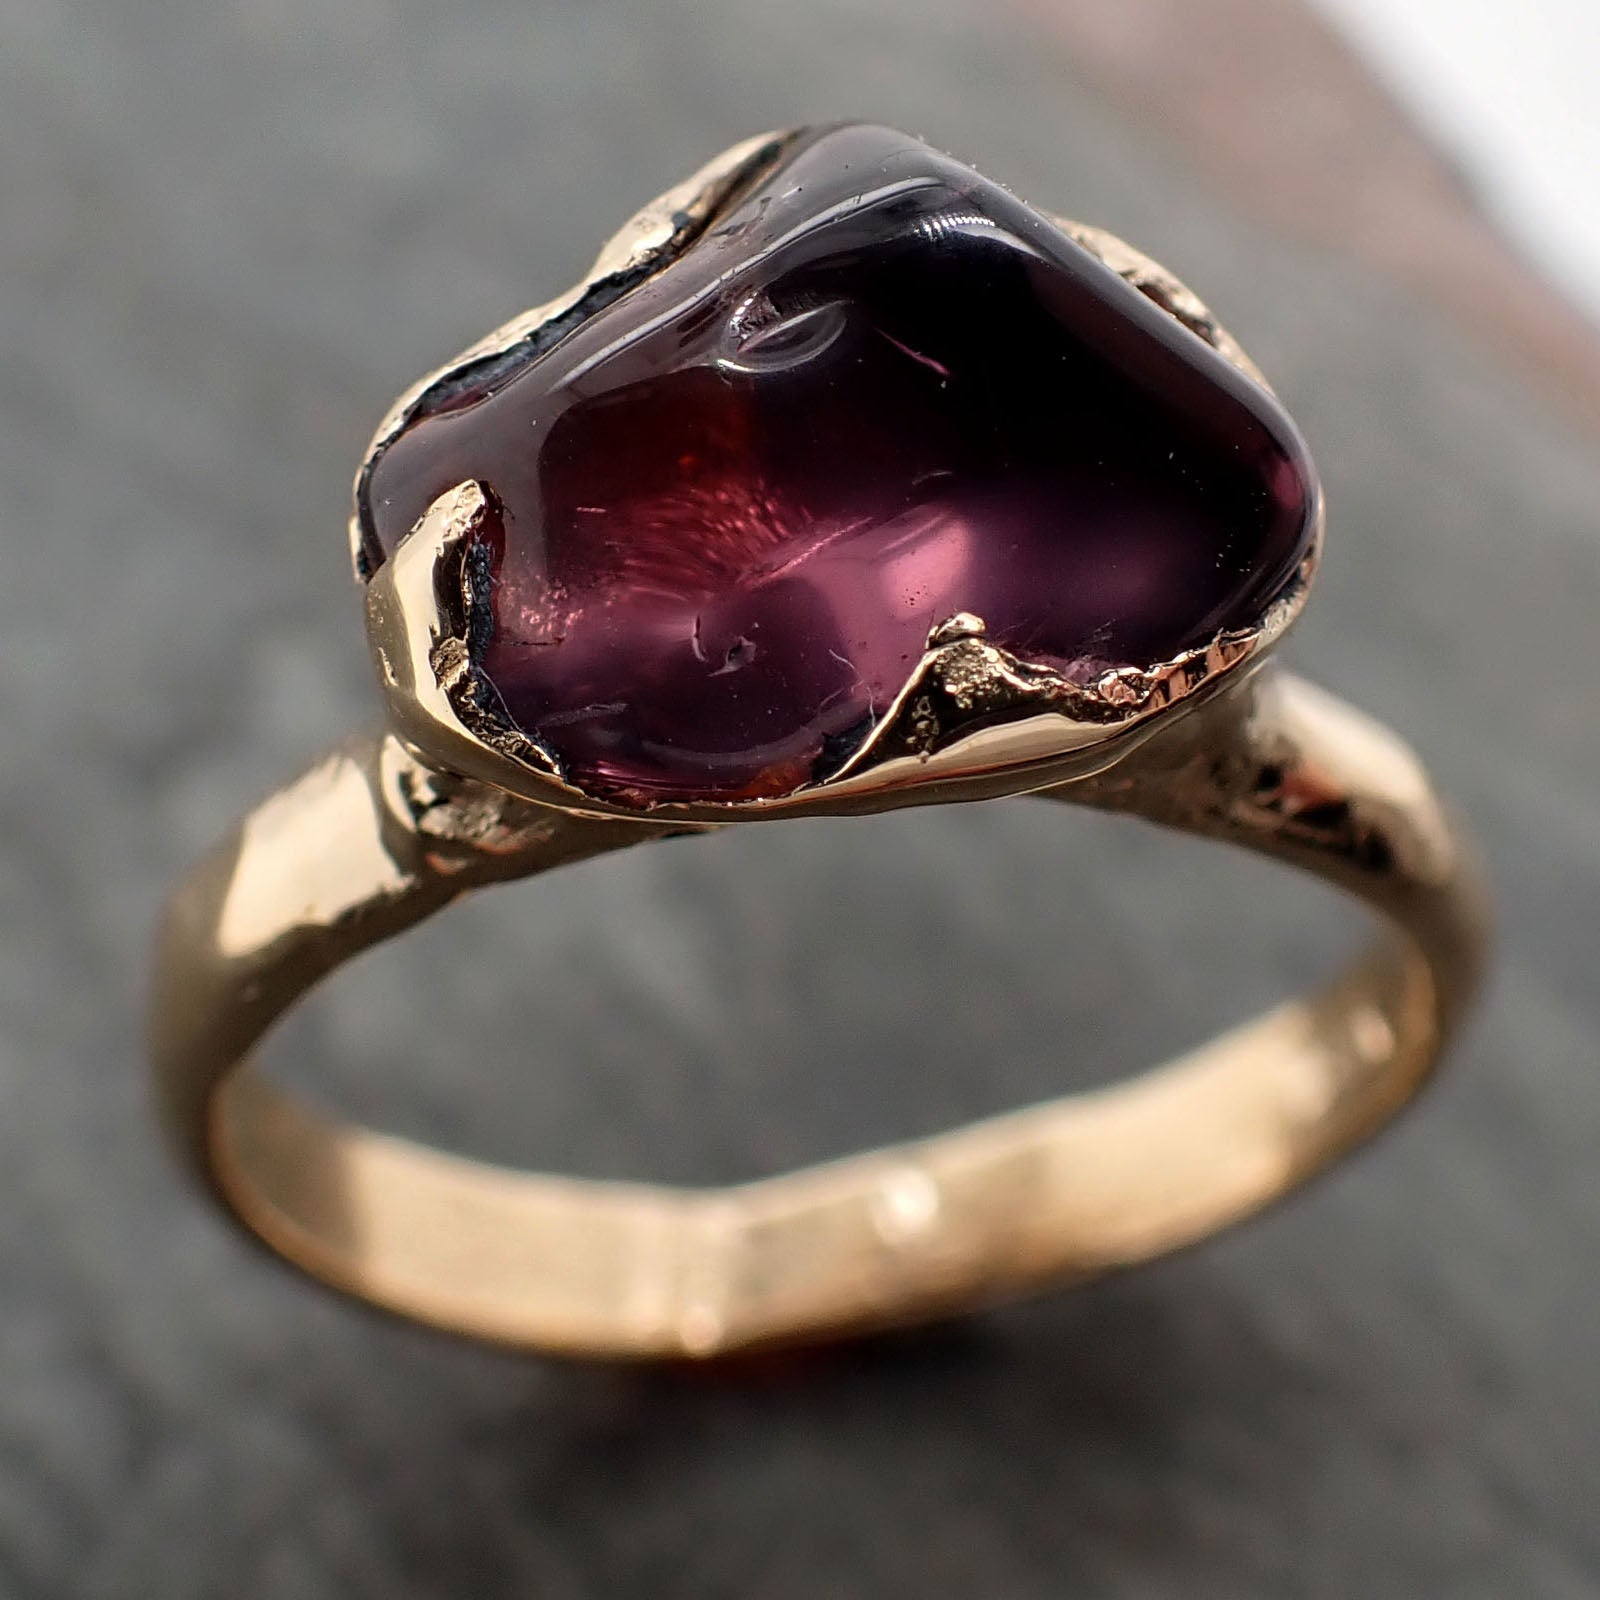 Garnet tumbled red wine 18k Yellow gold Solitaire gemstone ring 2785